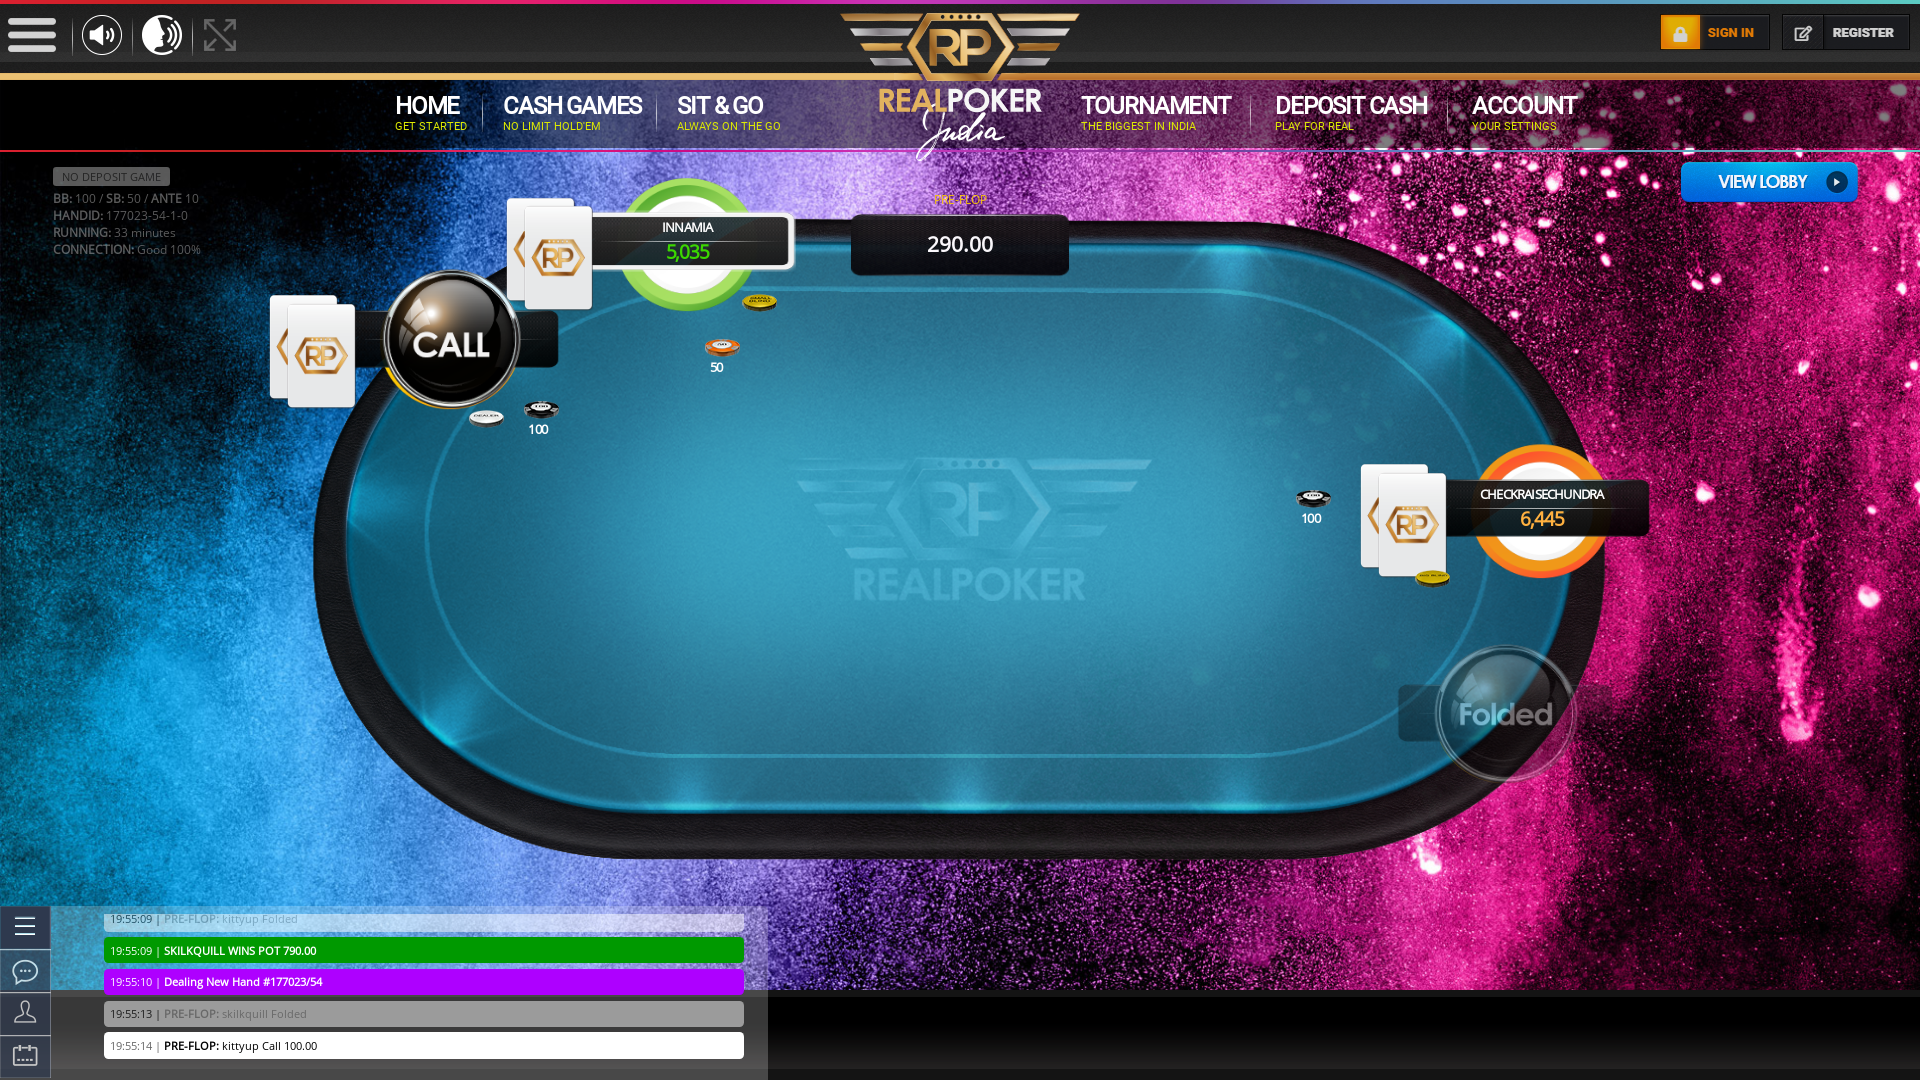 Real poker on a 10 player table in the 33rd minute of the game